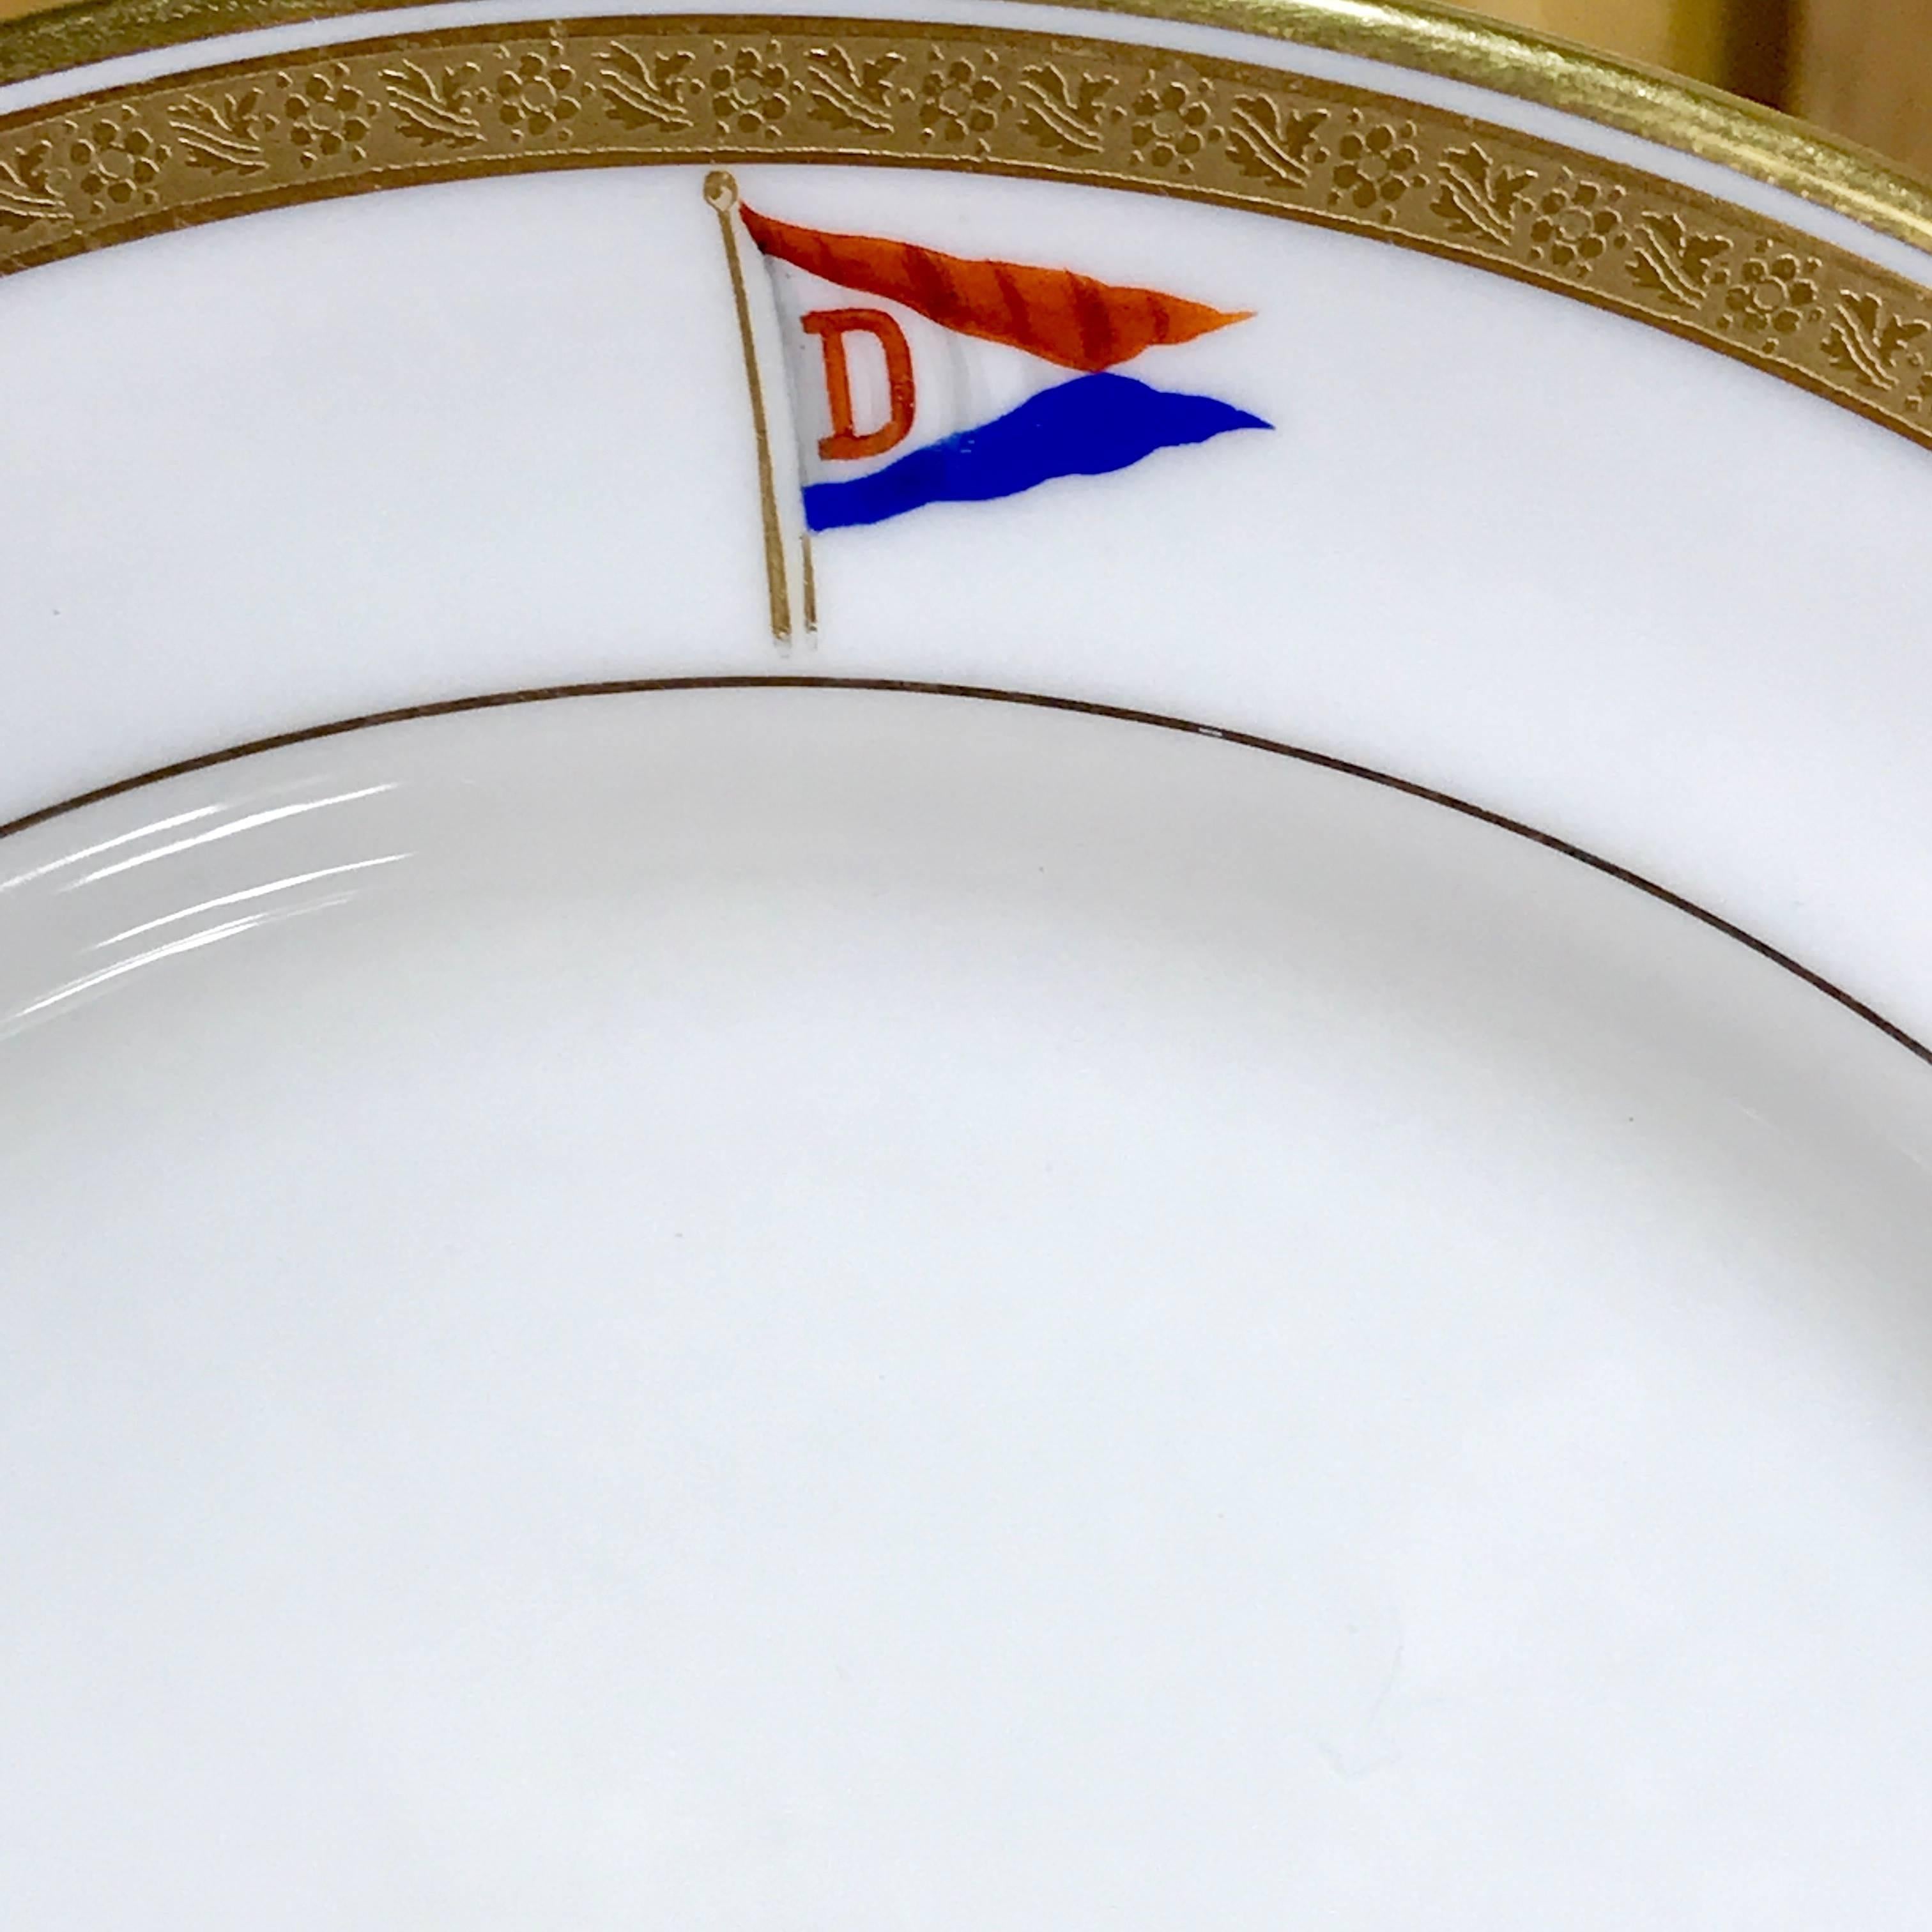 English 12 First Class Steamship or Yacht Dessert Plates by Cauldon For Sale